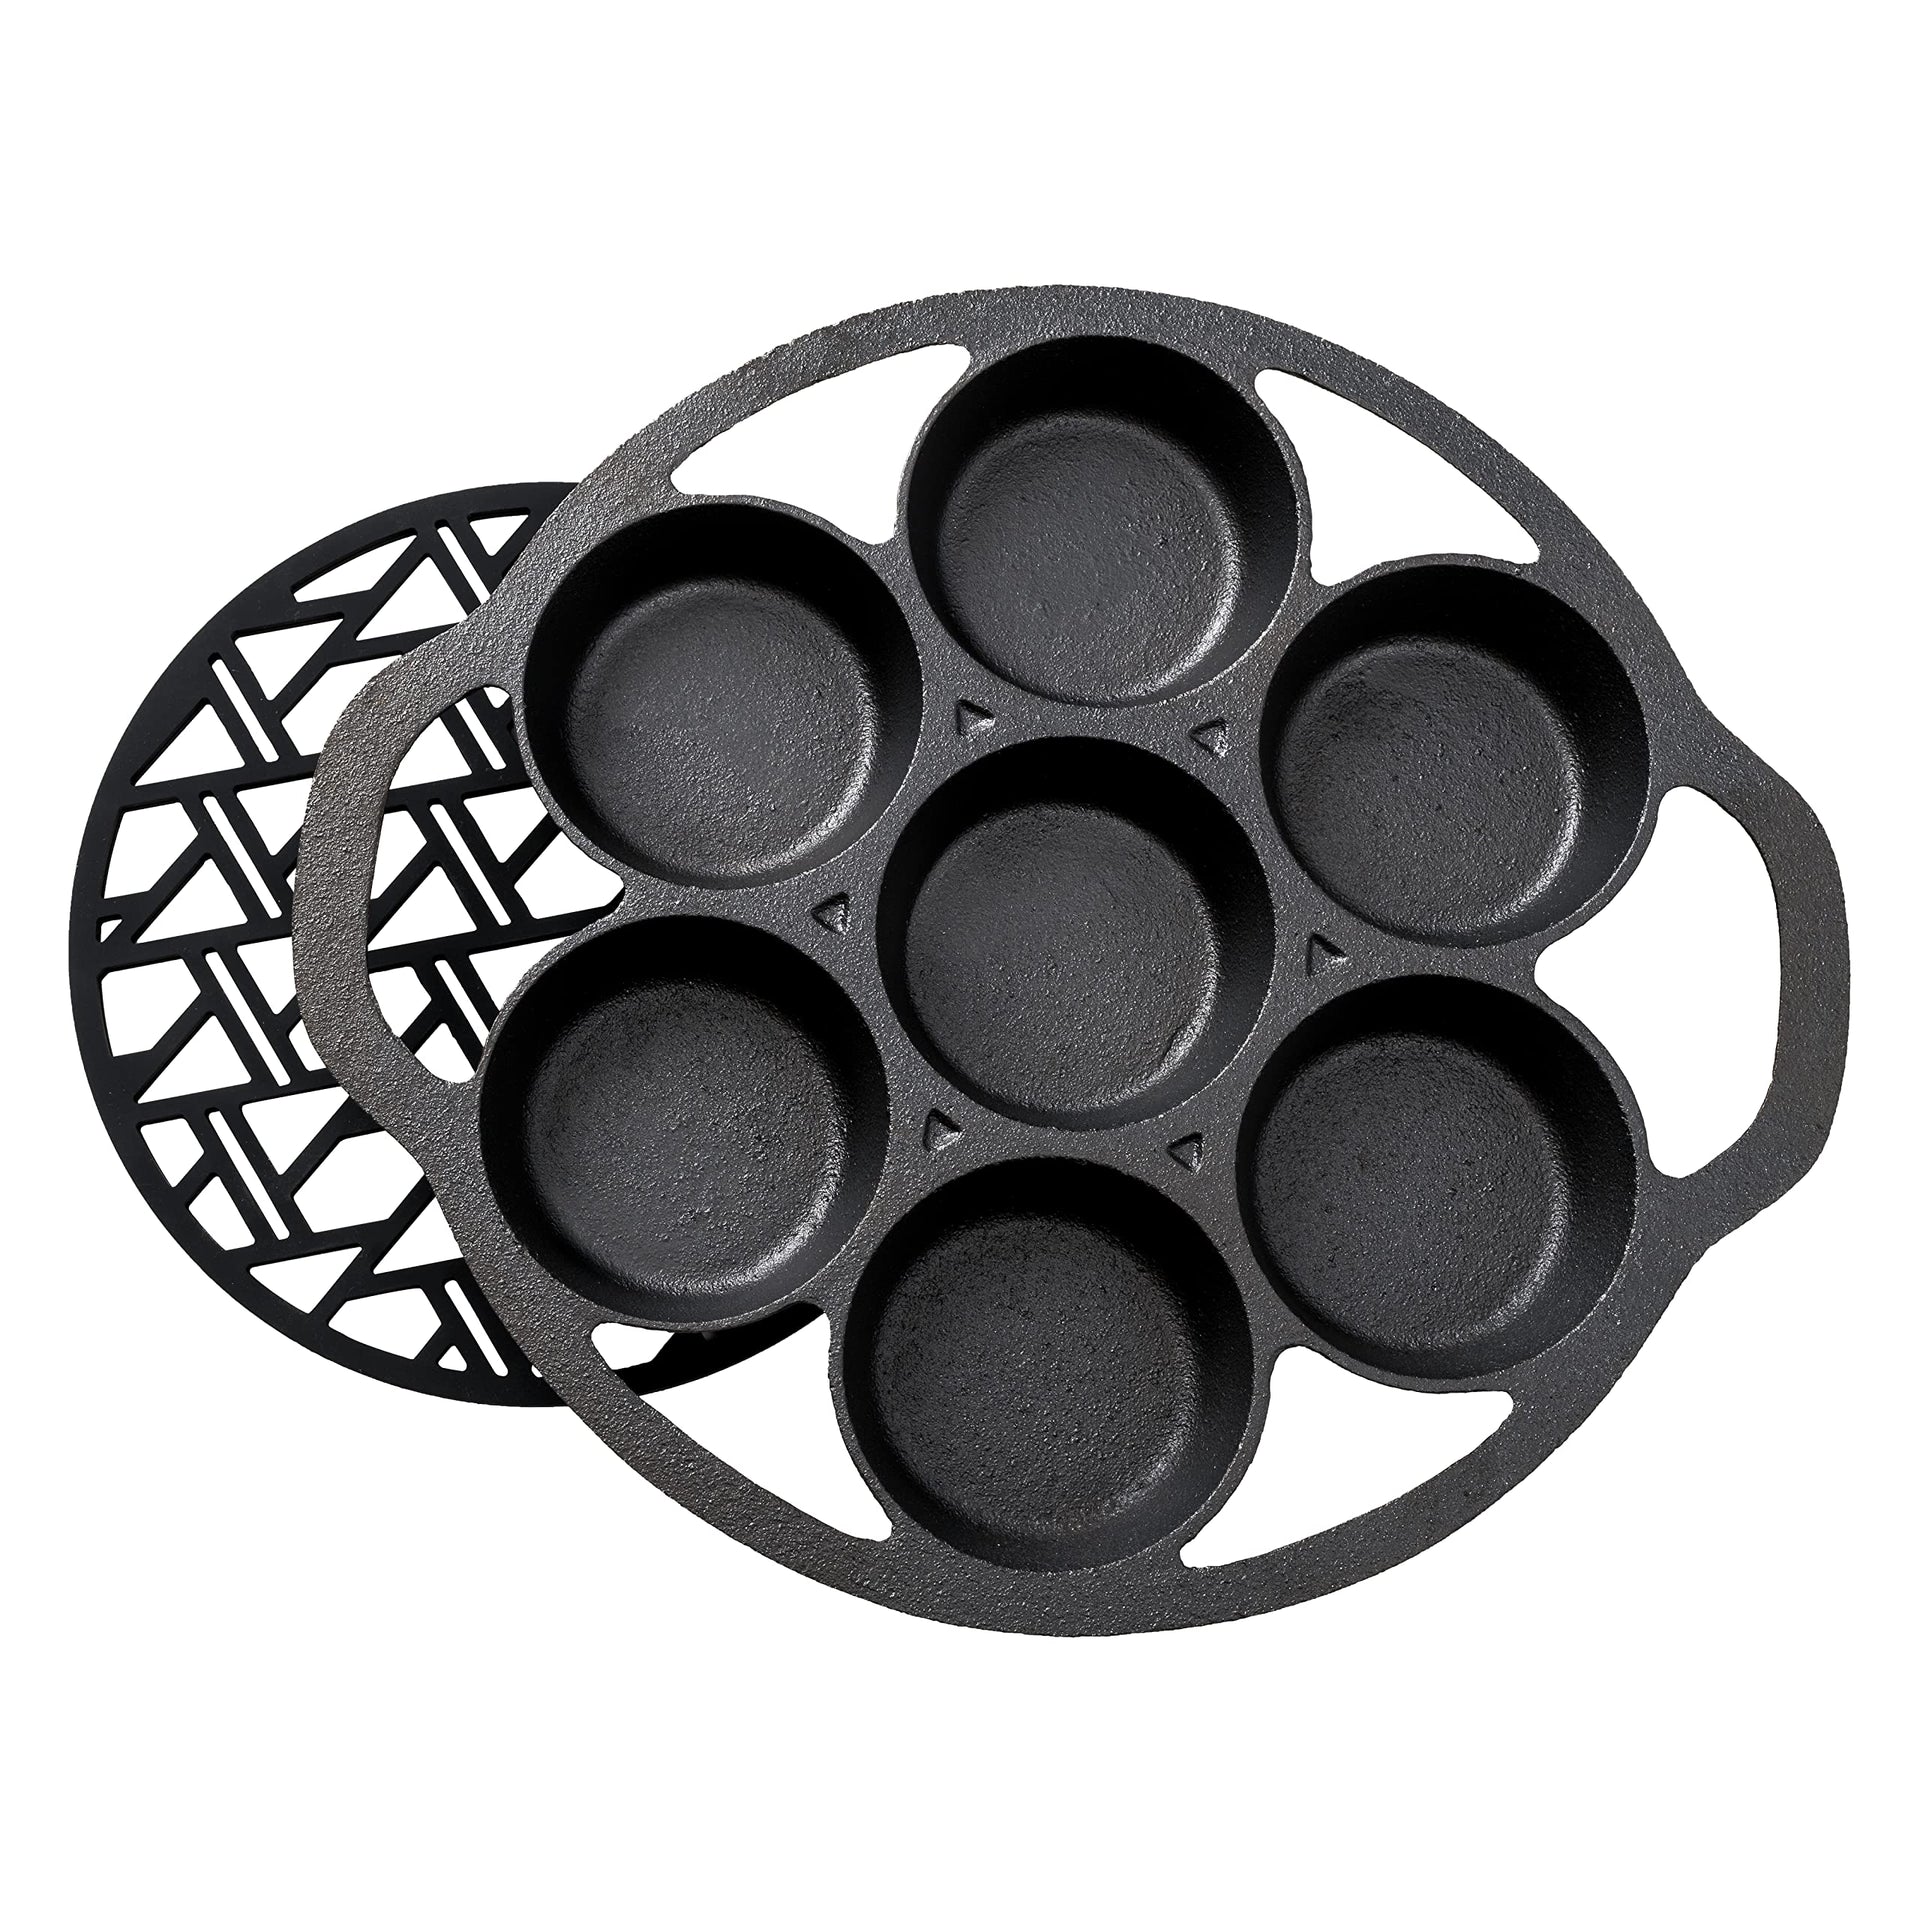 Pre-Seasoned Cast Iron Cake Pan for Baking Biscuits - 8-Cup Biscuit Pan with Helper